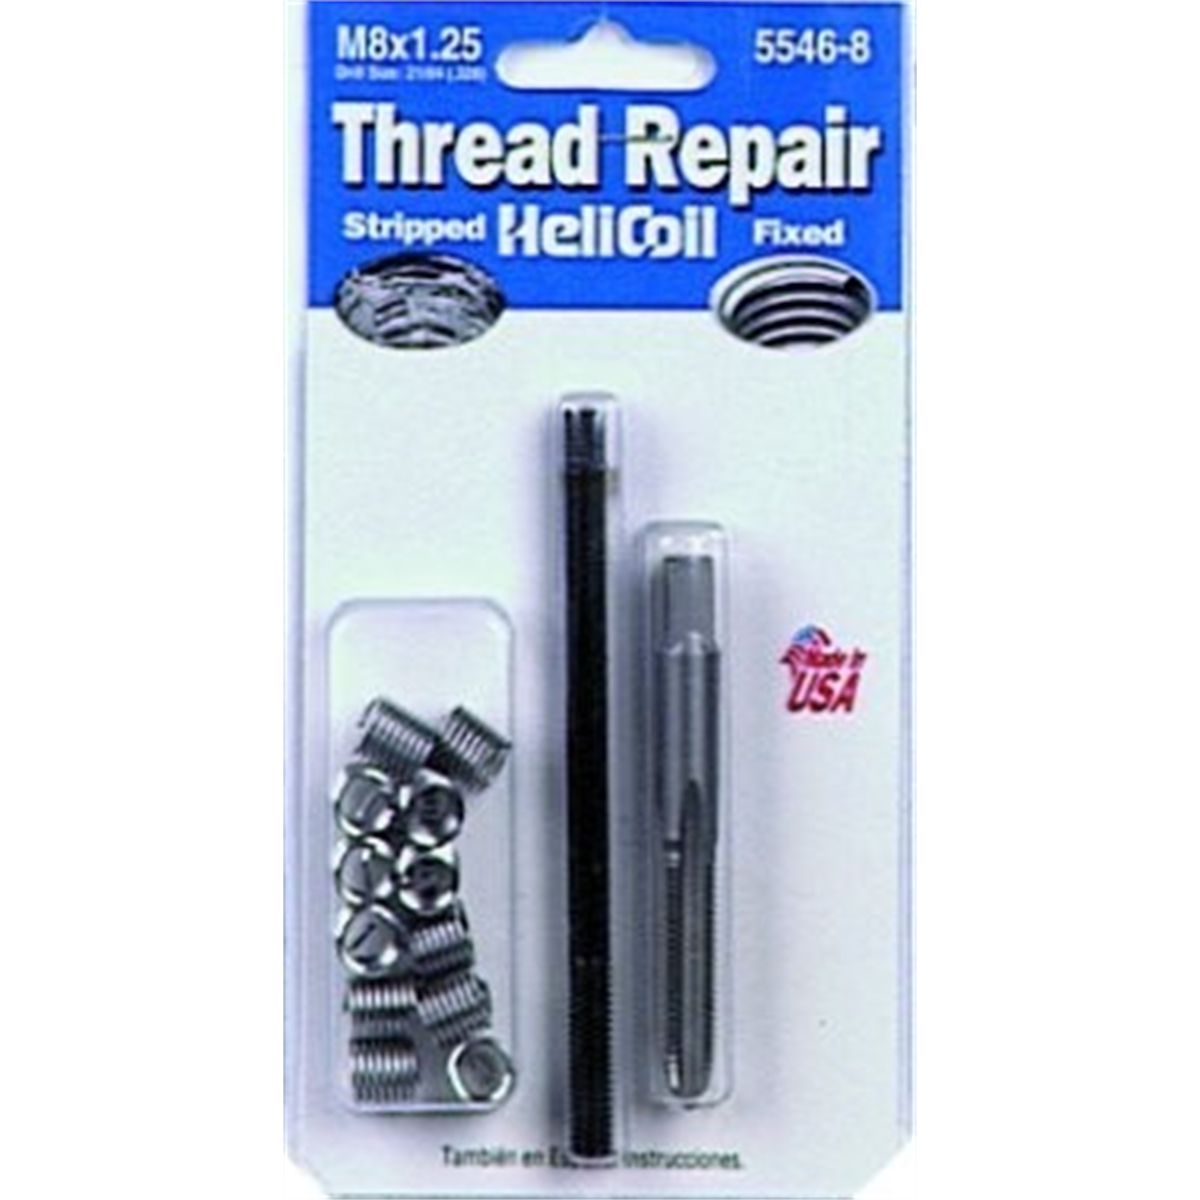 M10 x 1.5 Thread Repair kit 20 piece Helicoil Compatible 10mm Damaged Threads 